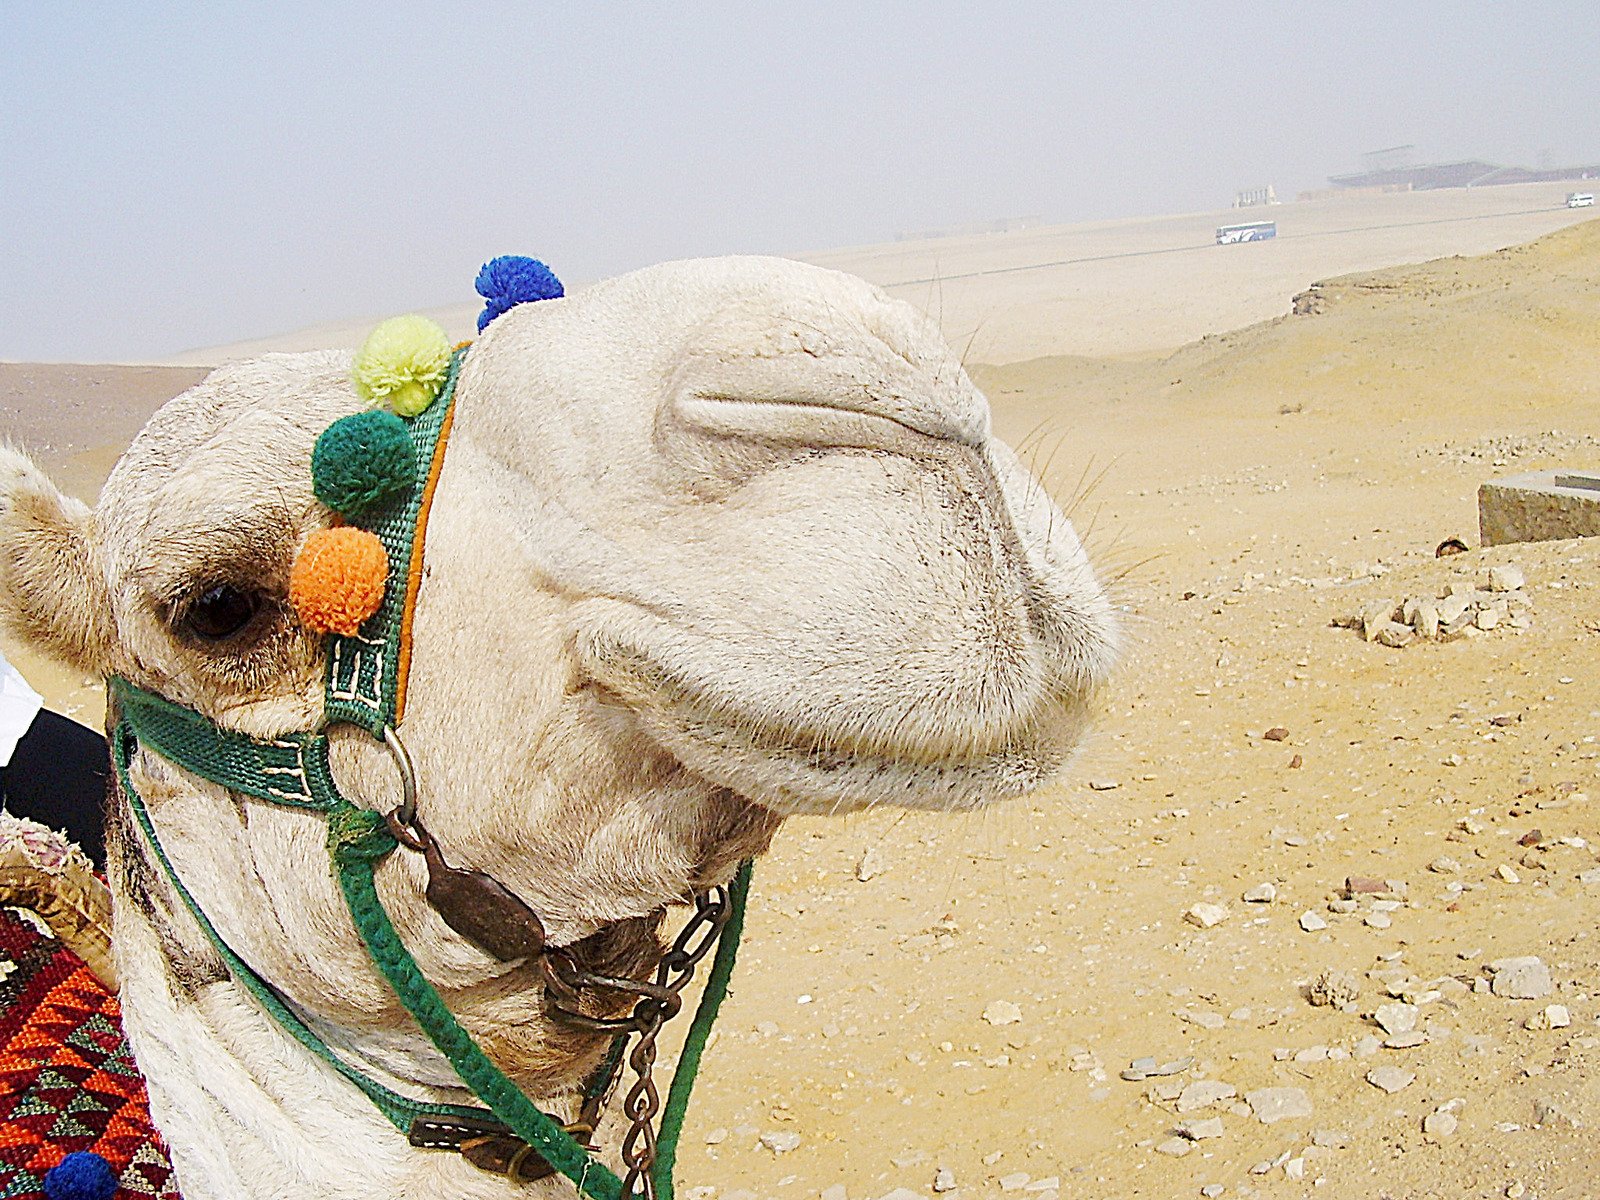 a camel with a colorful hat is standing in the desert